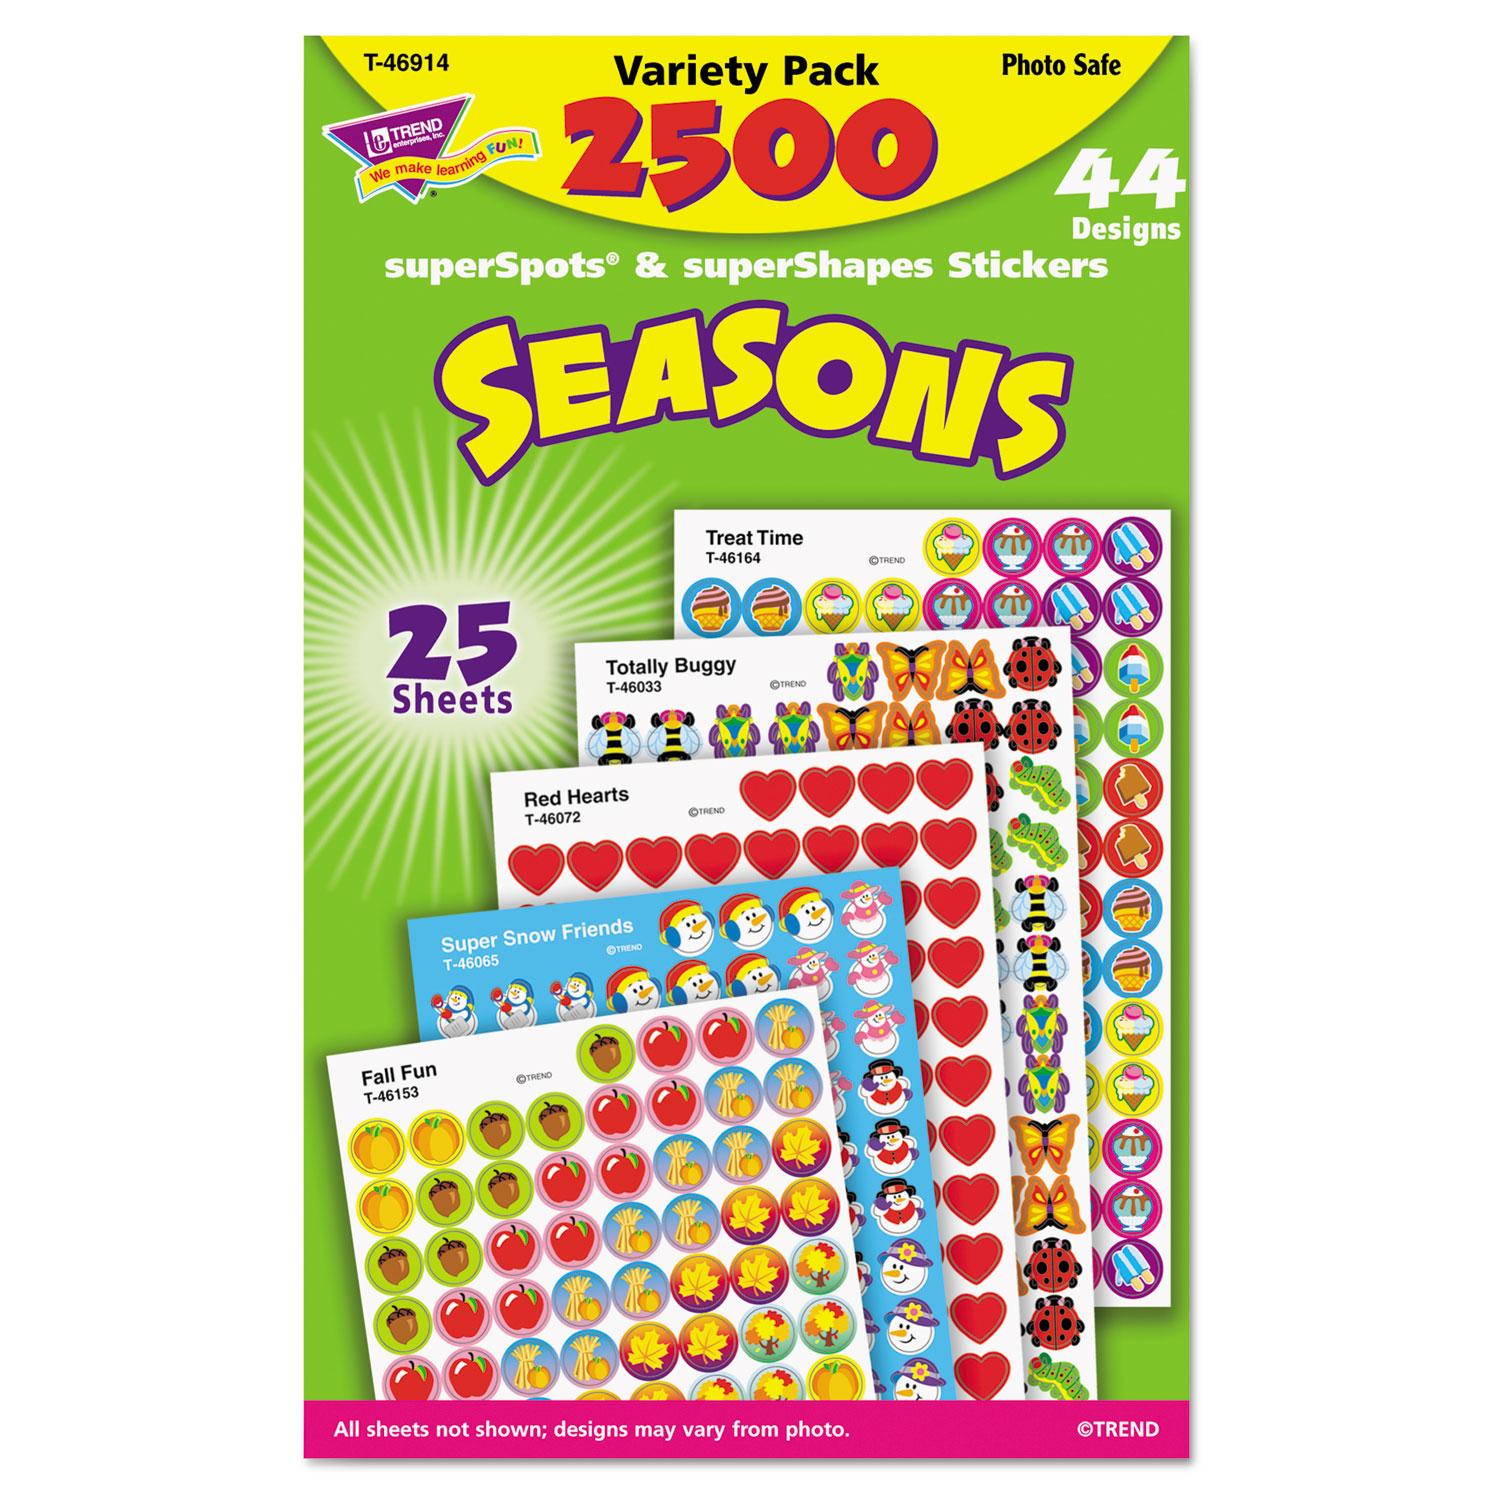 SuperSpots and SuperShapes Sticker Variety Packs, Seasons, 2,500/Pack